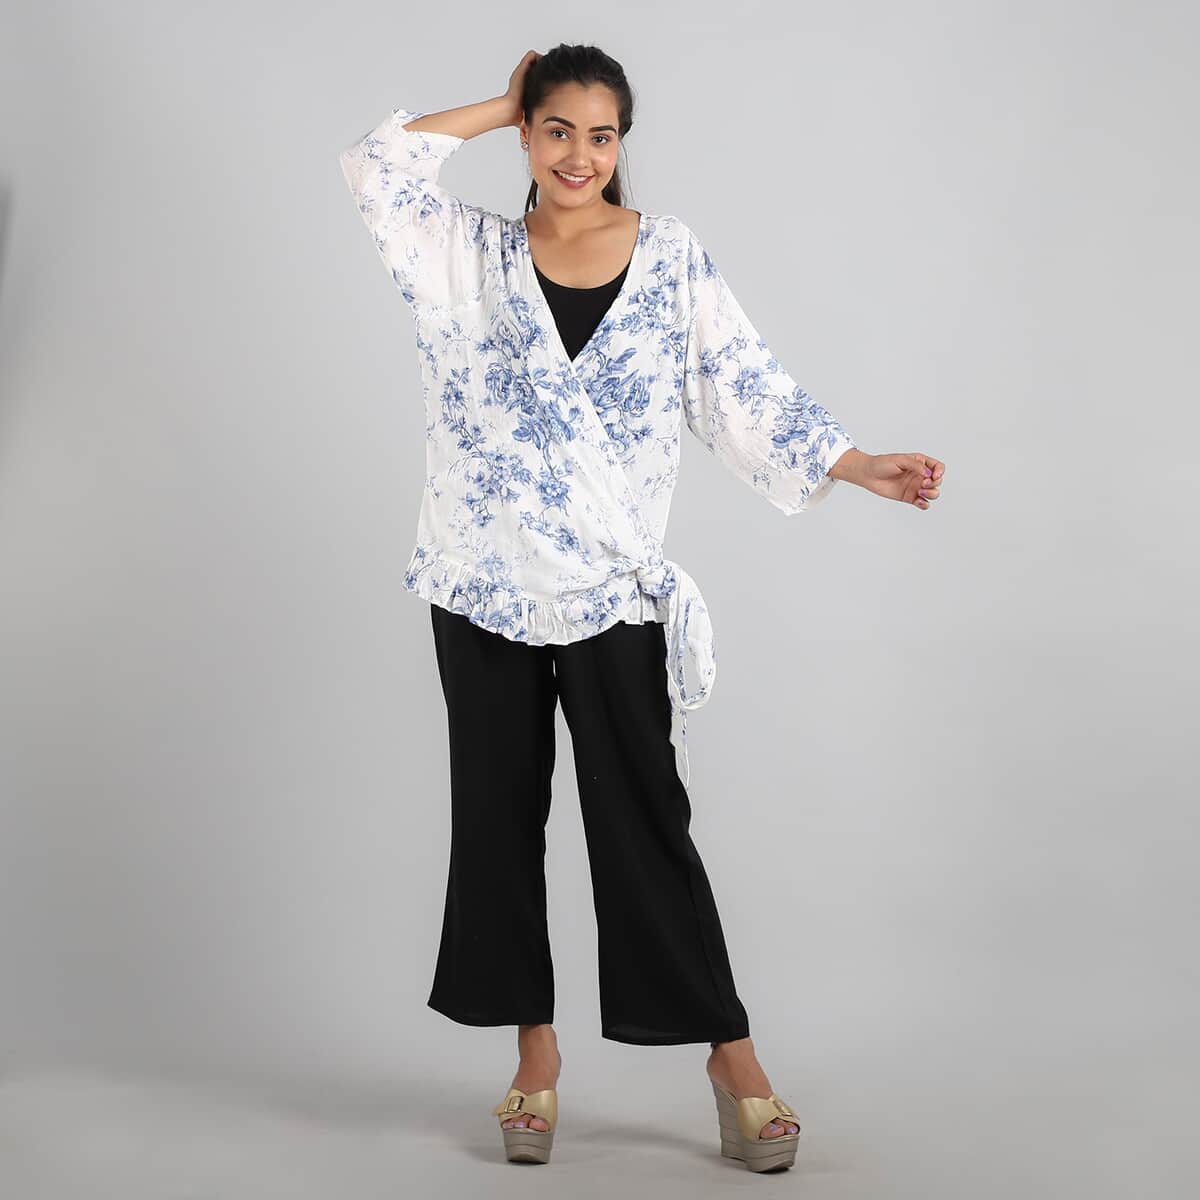 JOVIE Blue Floral Cotton Gauze Wrap Blouse with Frill Trim - One Size Missy image number 1